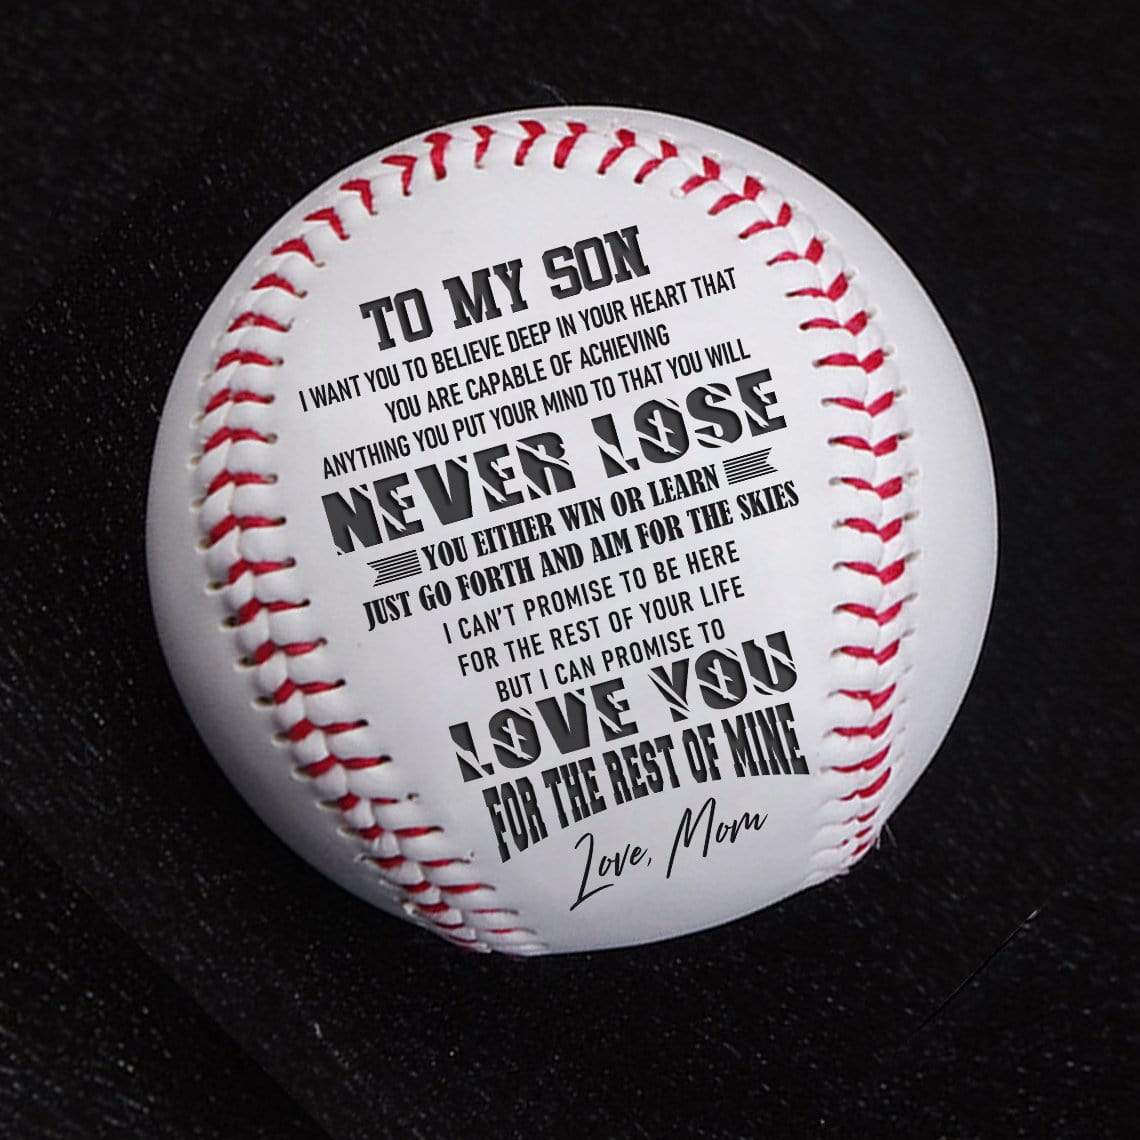 Baseball - To My Son - I Want You To Believe Deep In Your Heart - Gaa16001